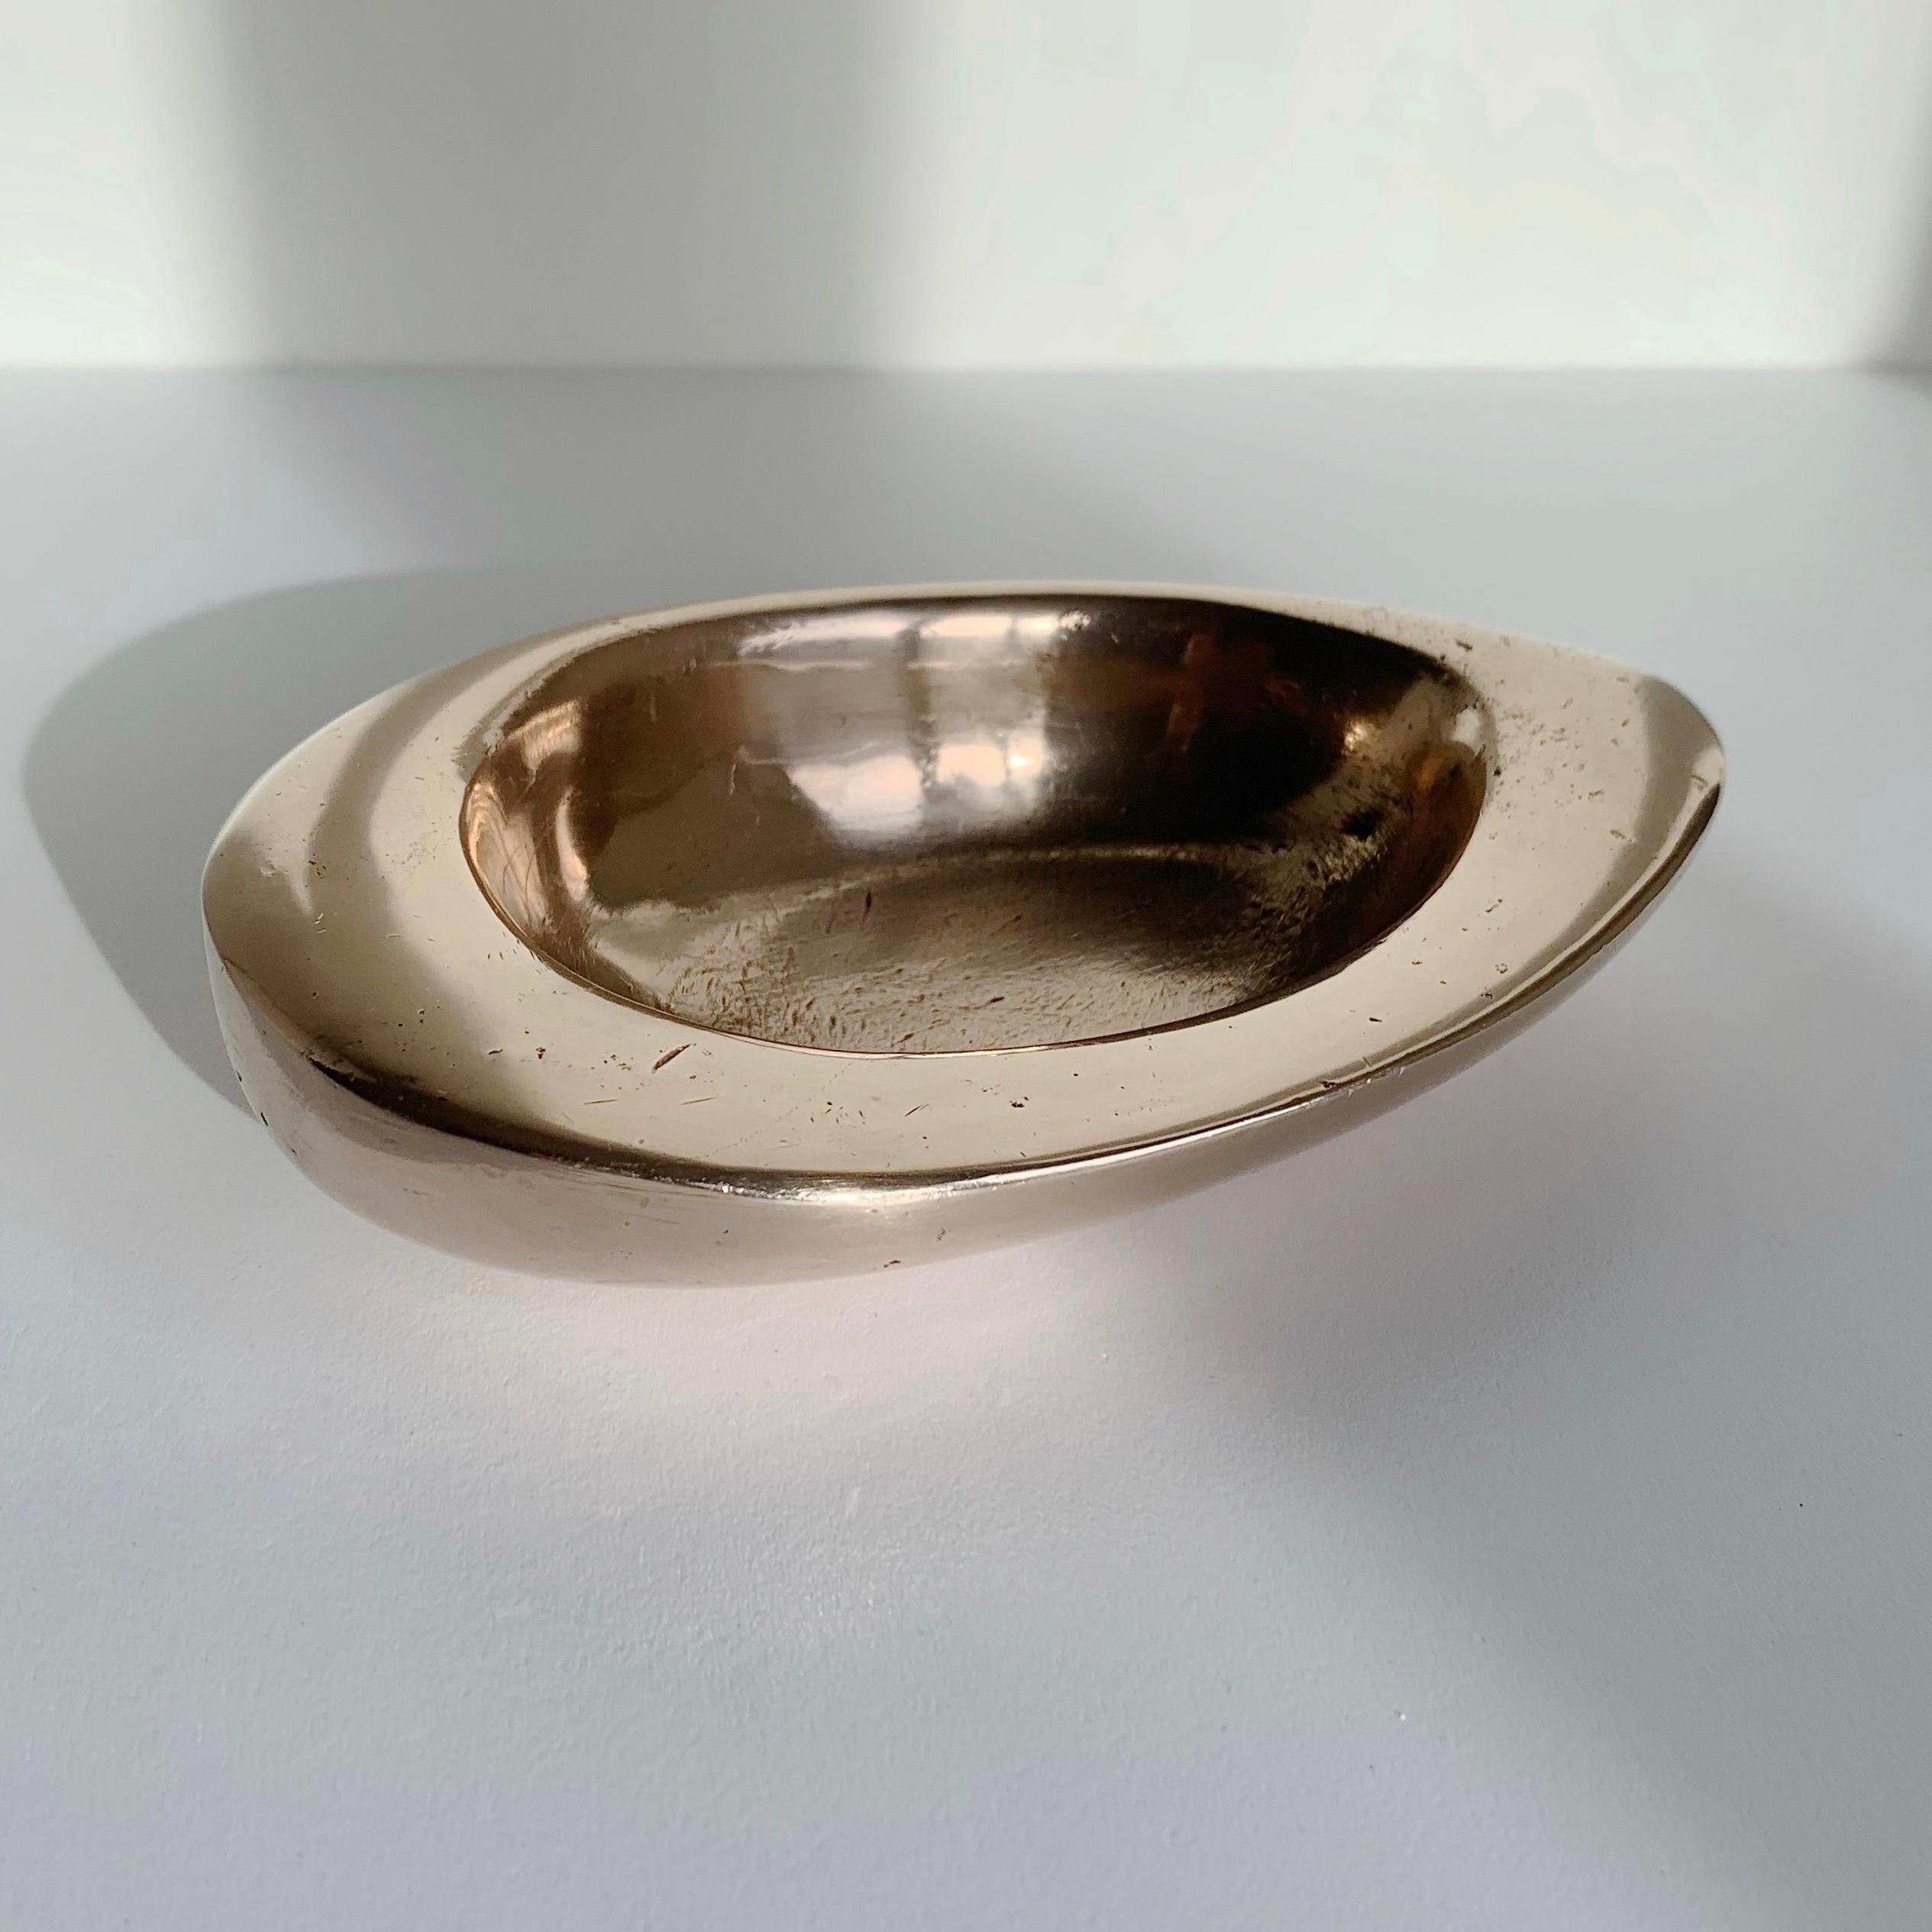 Nice Monique Gerber free-form vide-poche, circa 1970, France.
Polished gilt bronze. Vintage collector item.
Dimensions: 15 cm W, 9 cm D, 3 cm H.
All purchases are covered by our Buyer Protection Guarantee.
This item can be returned within 7 days of